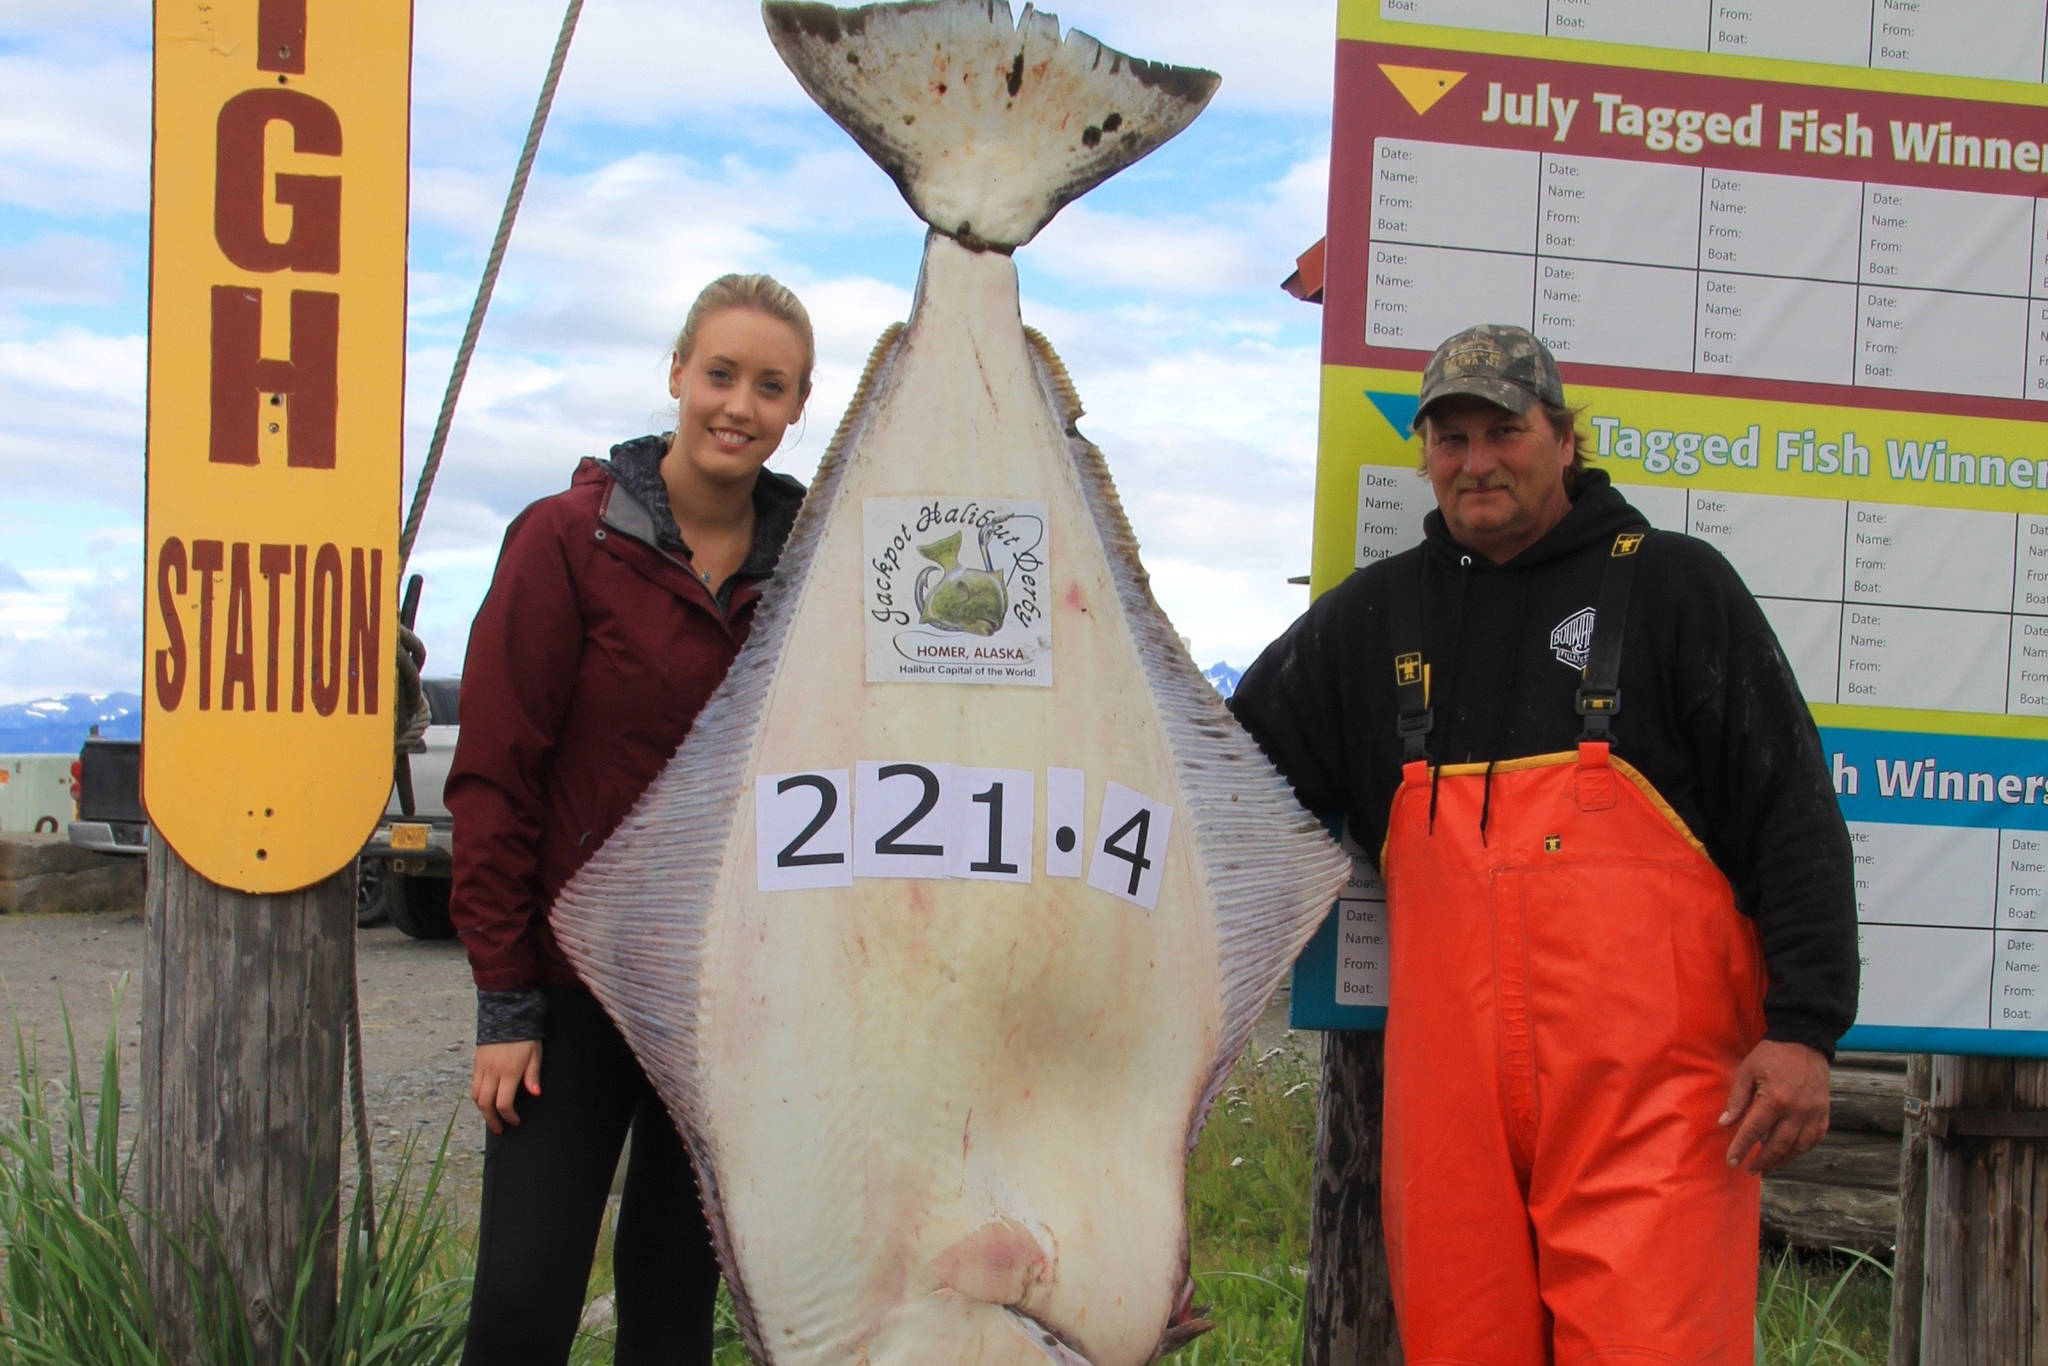 Ashley Camp, left, of Vancouver, British Columbia, Canada, poses with her 221.4-pound halibut caught on July 28, 2018 near Homer, Alaska. She caught the current Homer Jackpot Halibut Derby leader while fishing with Captain Brian Nollar, right, on the Bell Isles with Midnight Sun Charters. (Photo provided)